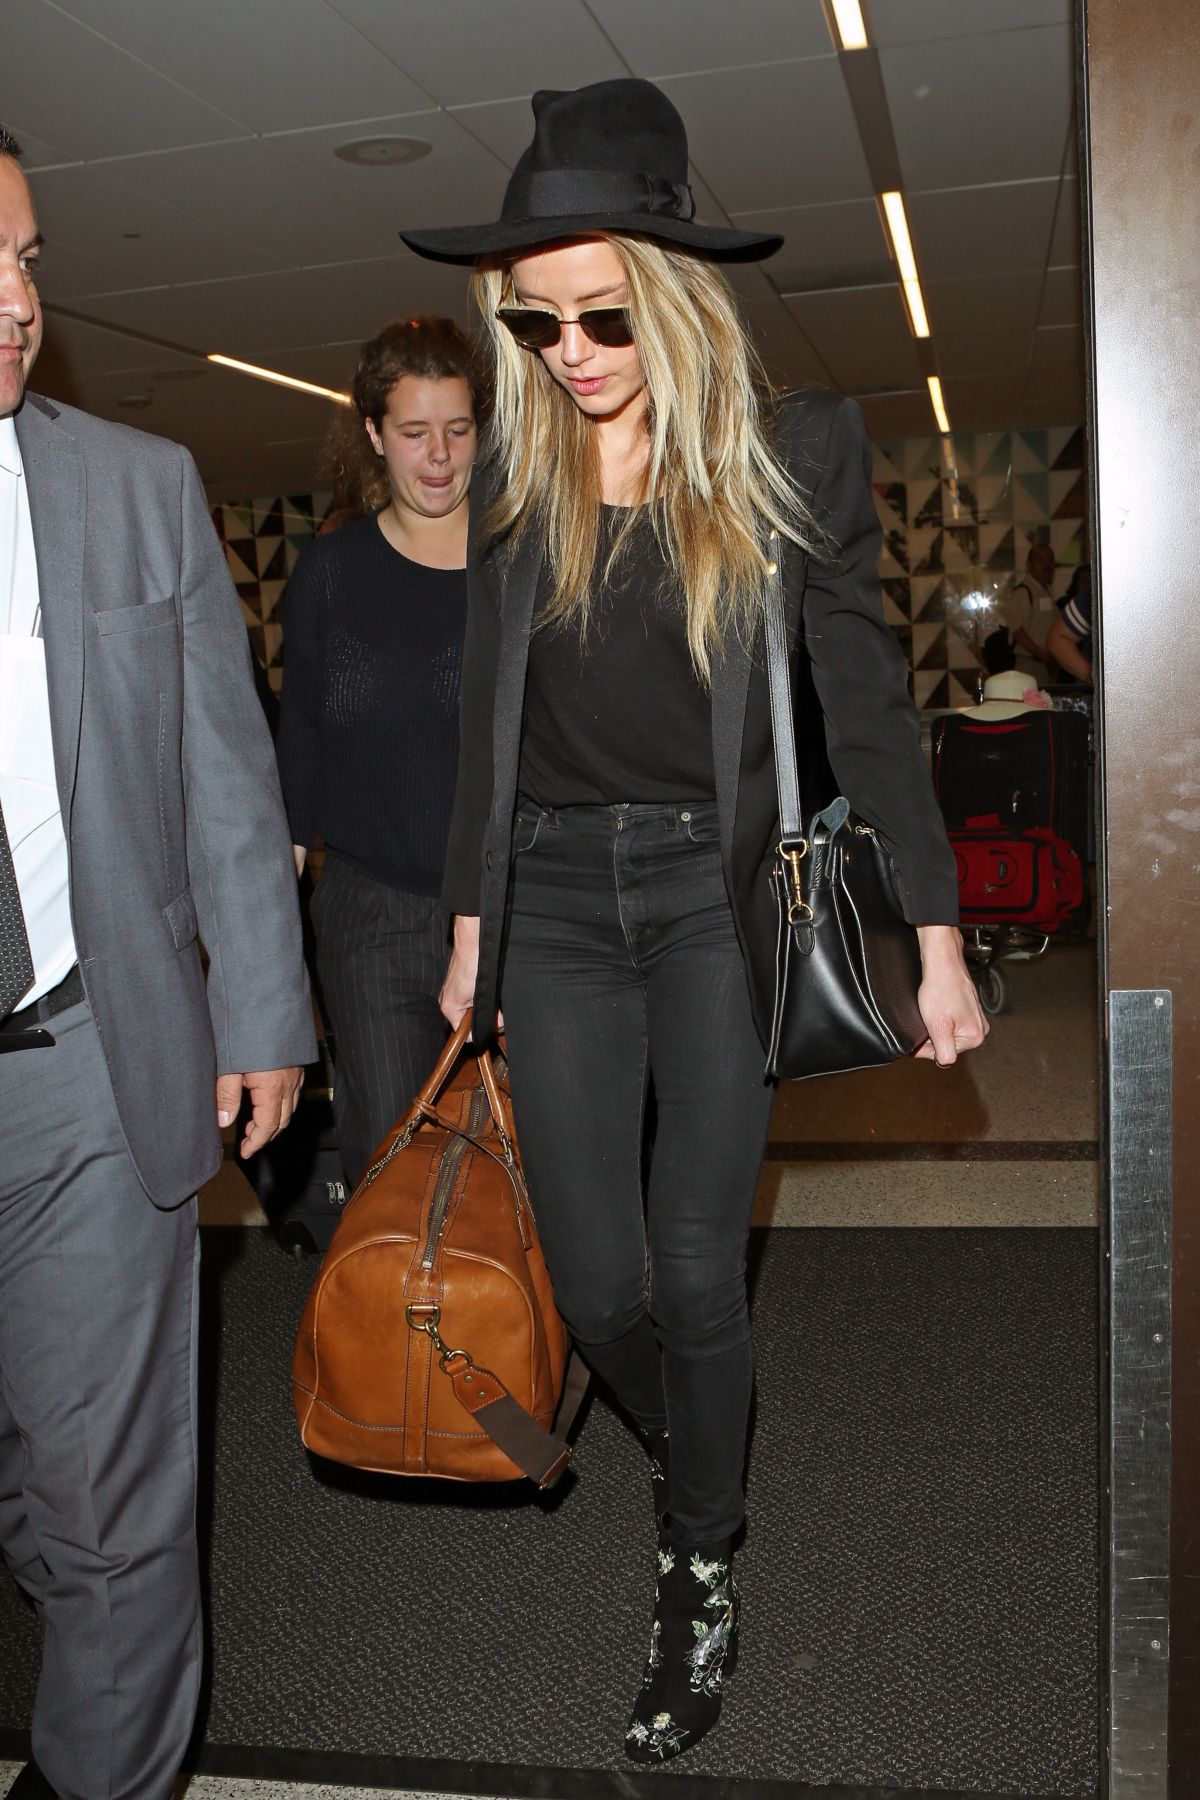 AMBER HEARD at LAX Airport in Los Angeles 08/31/2016 – HawtCelebs